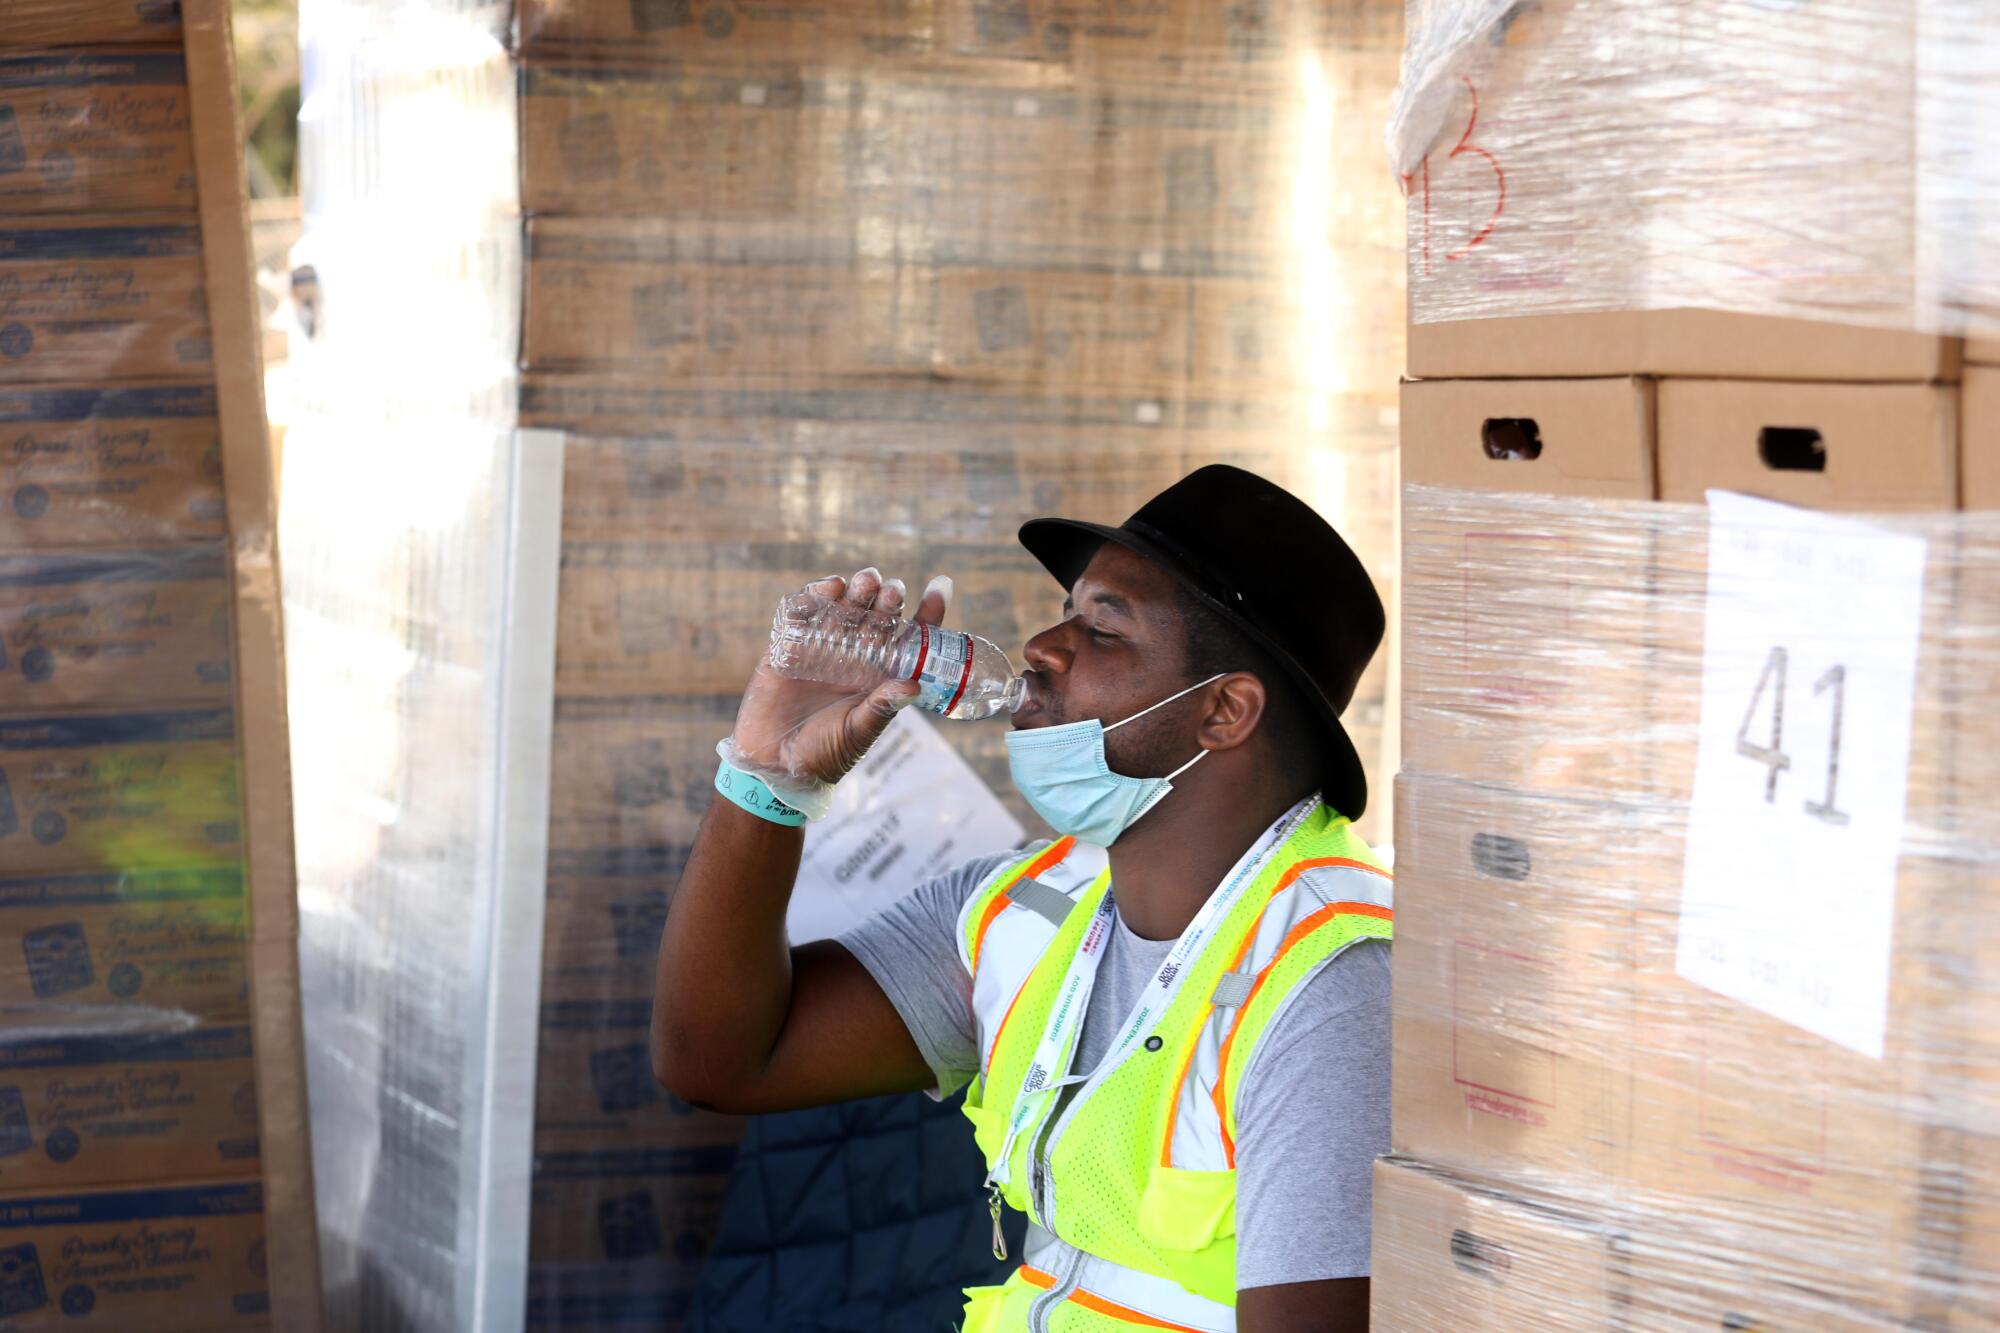 A man in a high-vis vest drinks water while sitting among pallets of cardboard boxes